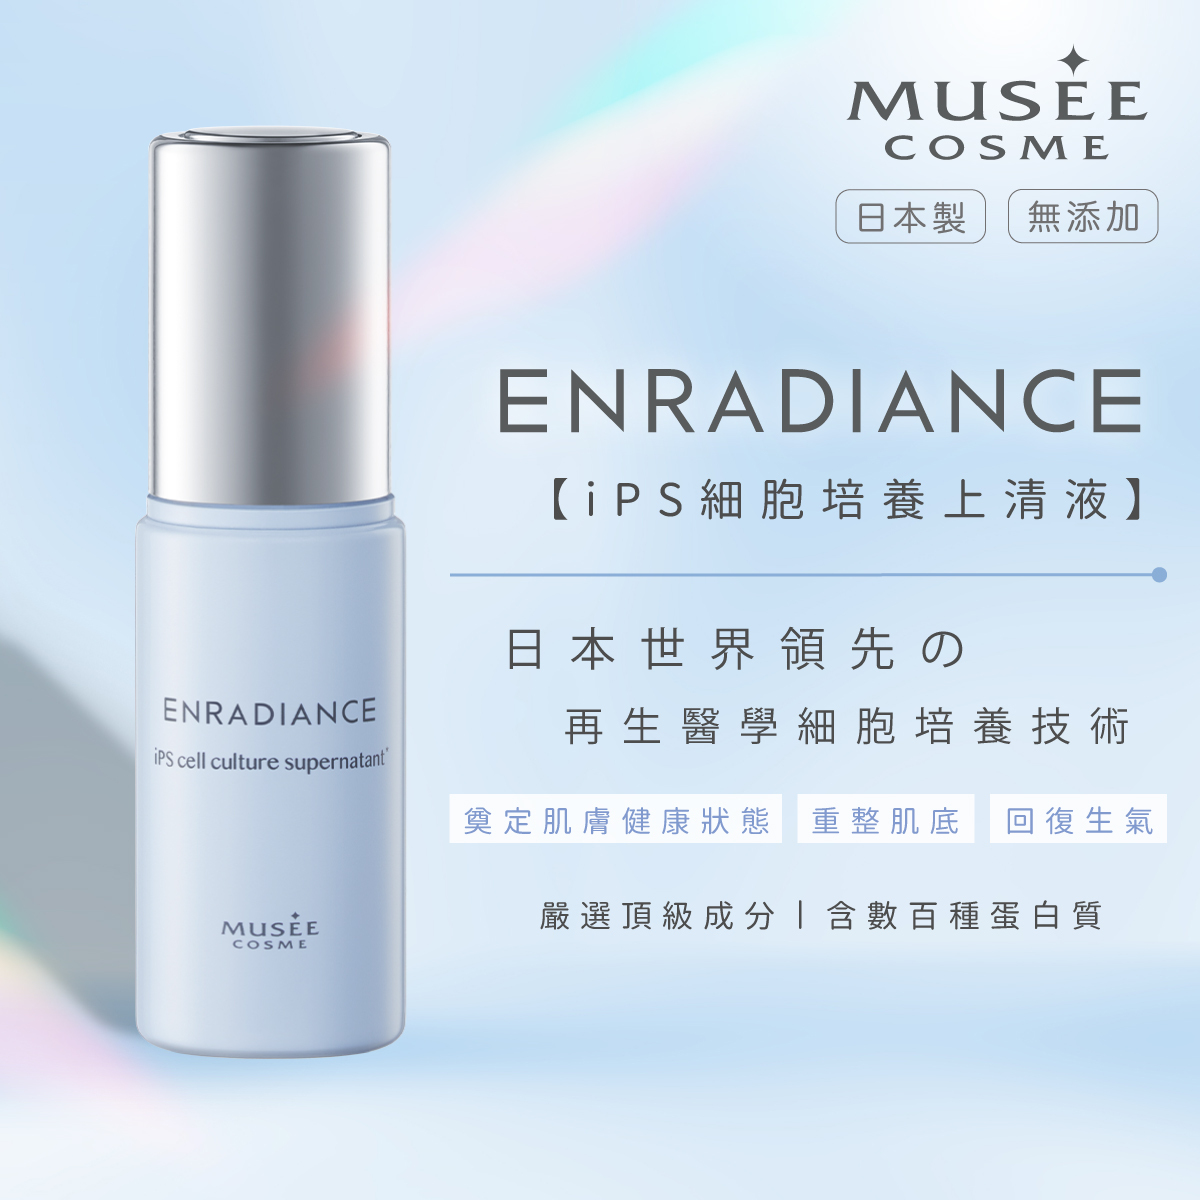 MUSEE COSME | ENRADIANCE iPS Cell Culture Supernatant | HKTVmall